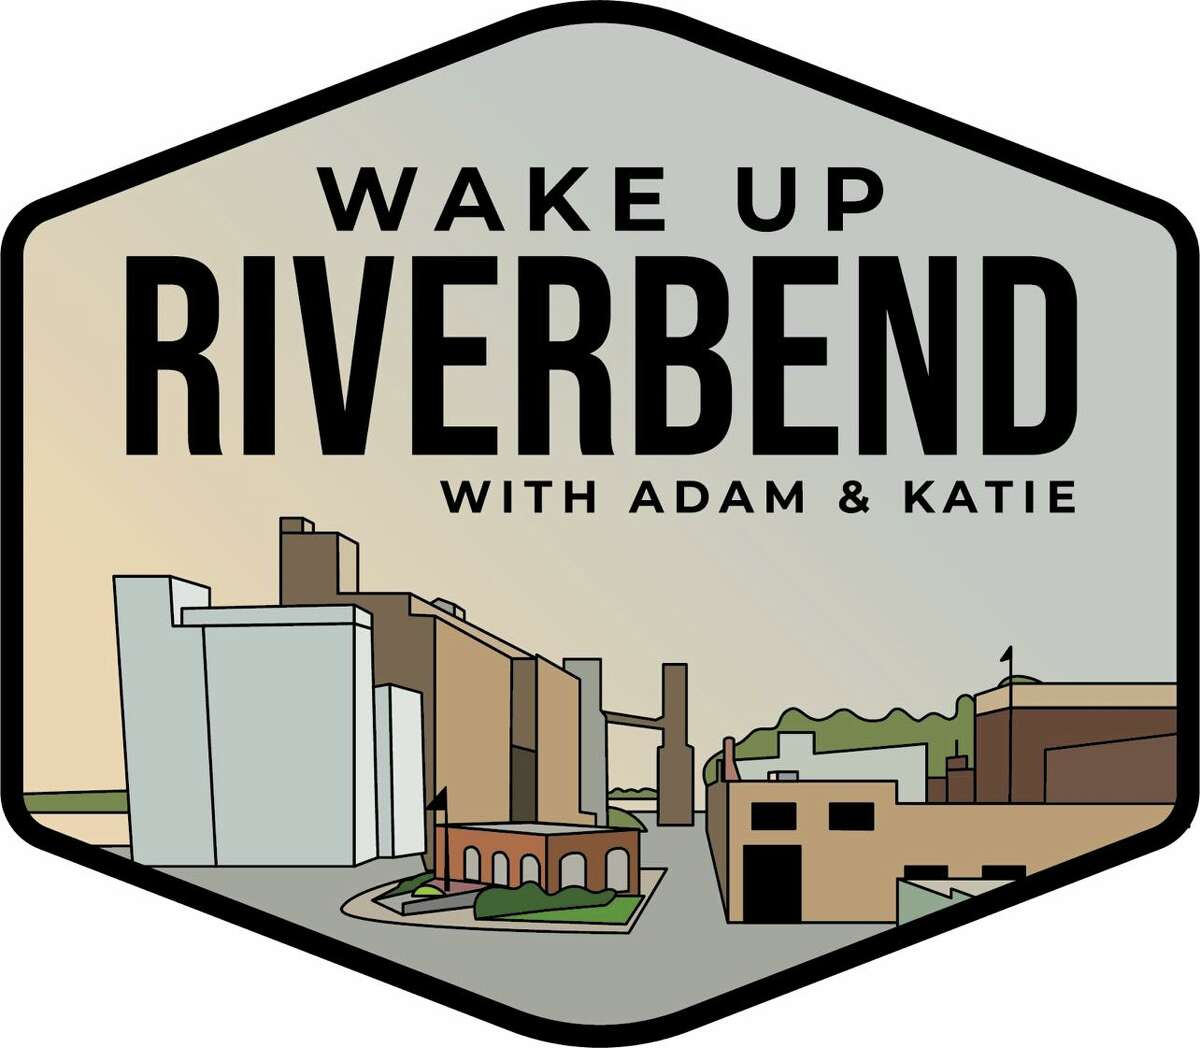 "Wake Up Riverbend" premieres at 8 p.m. Thursday on Facebook Live.